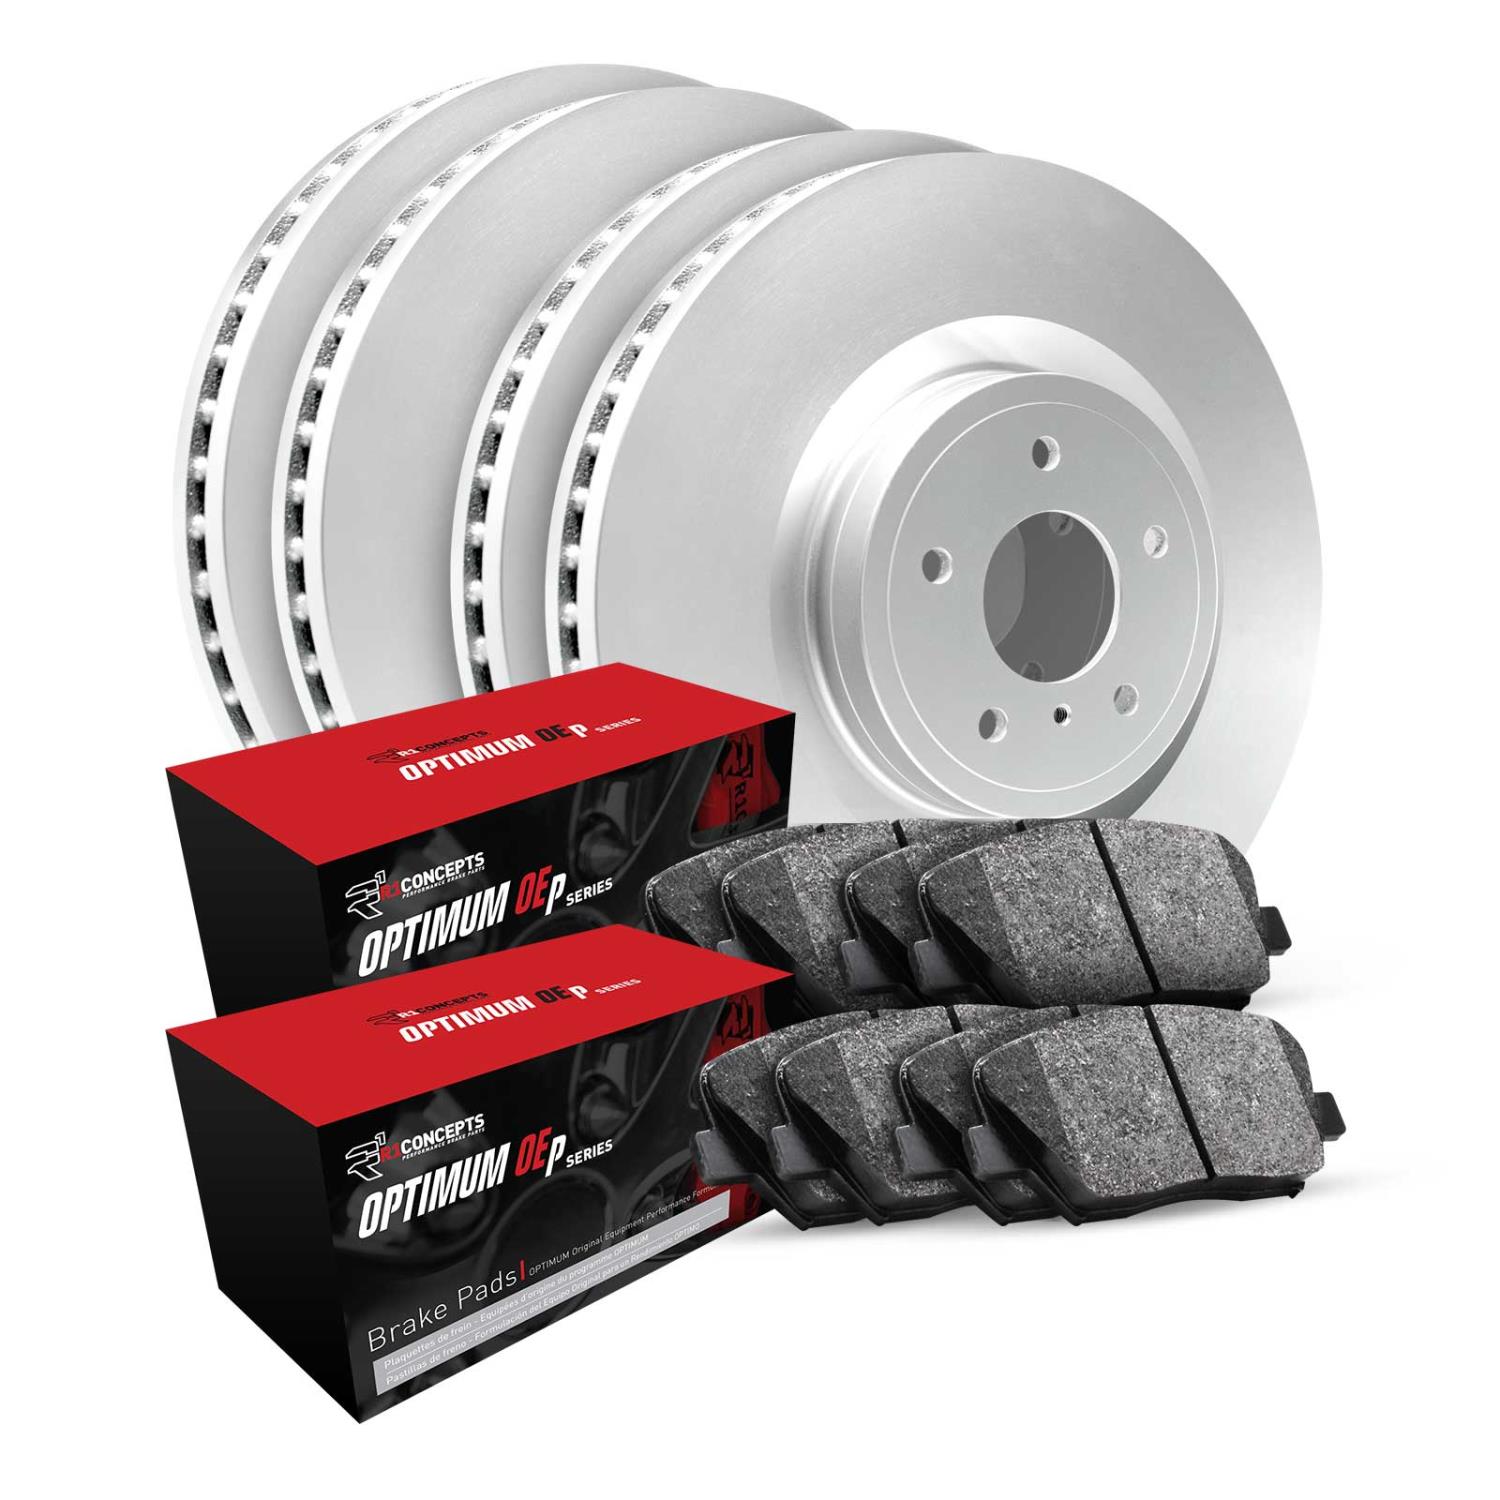 GEO-Carbon Brake Rotor Set w/Optimum OE Pads, Fits Select Ford/Lincoln/Mercury/Mazda, Position: Front & Rear